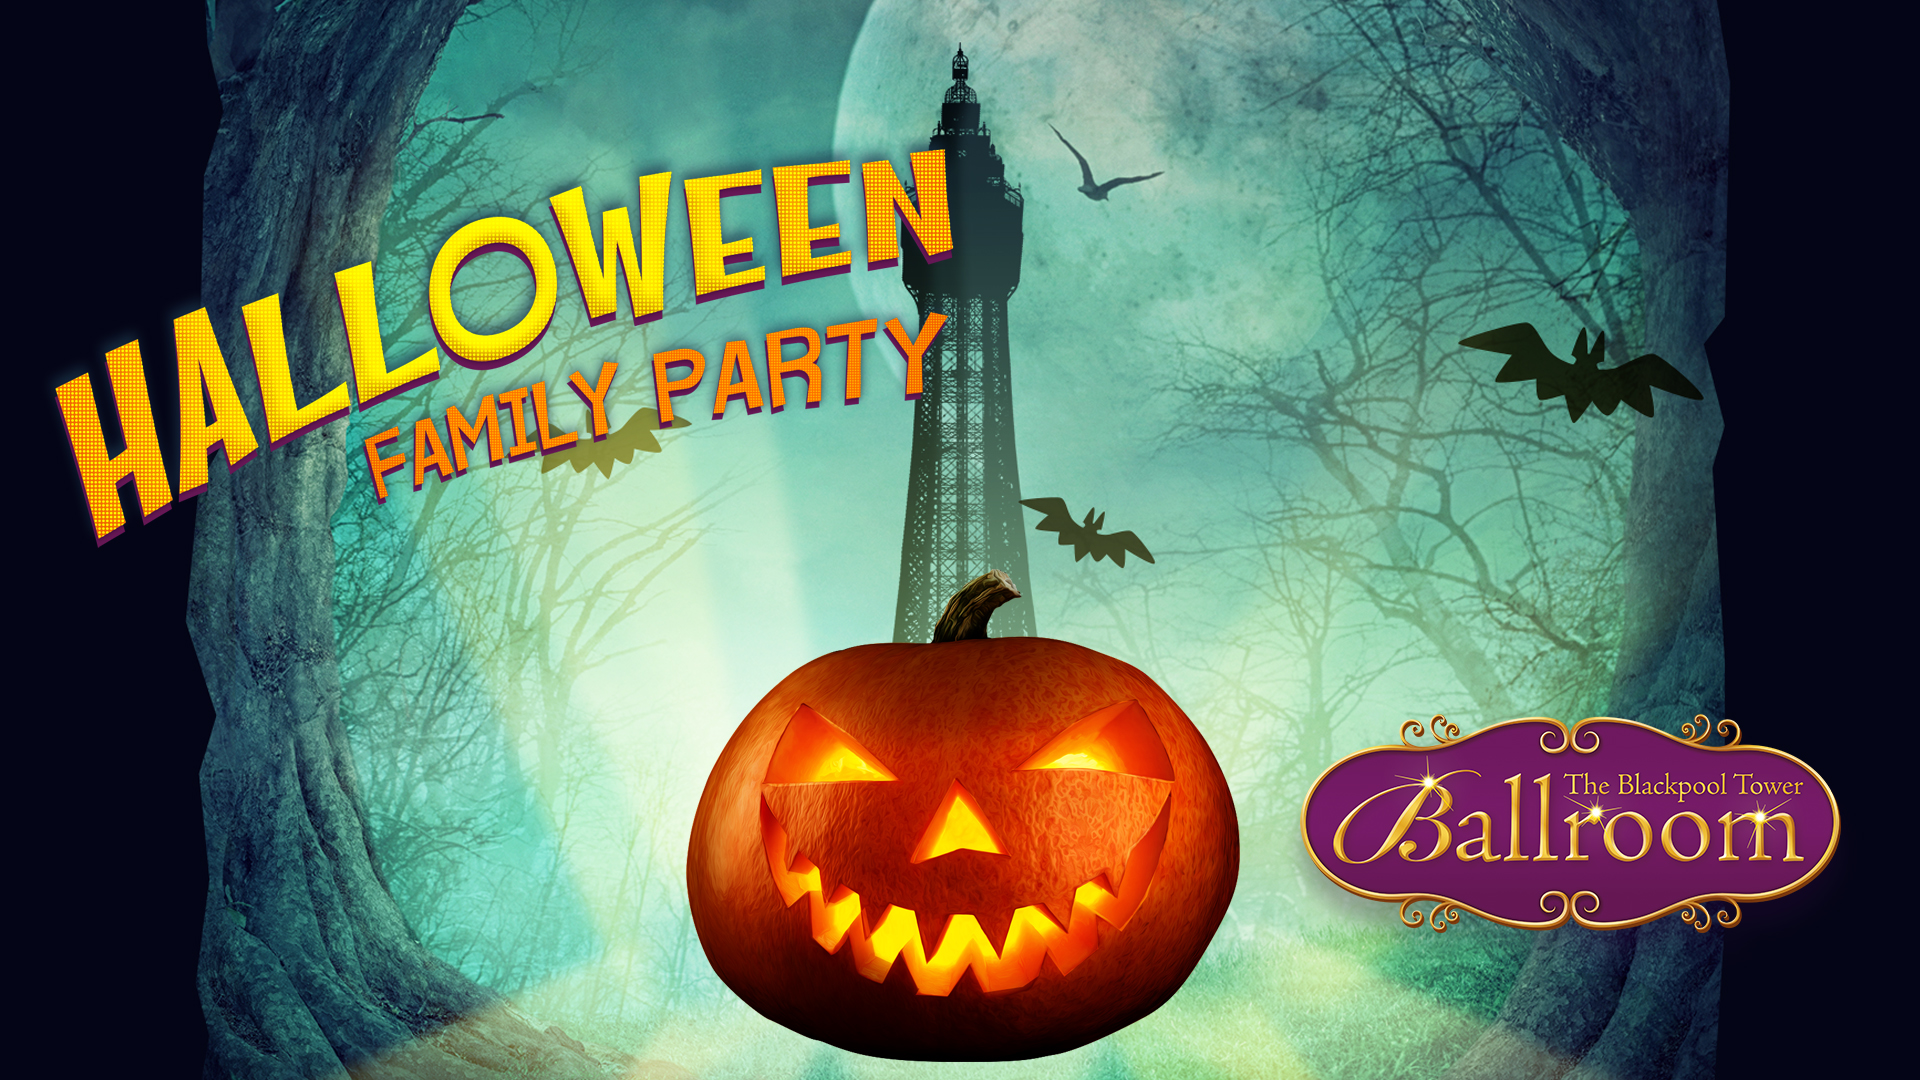 Halloween Family Party at The Blackpool Tower Ballroom